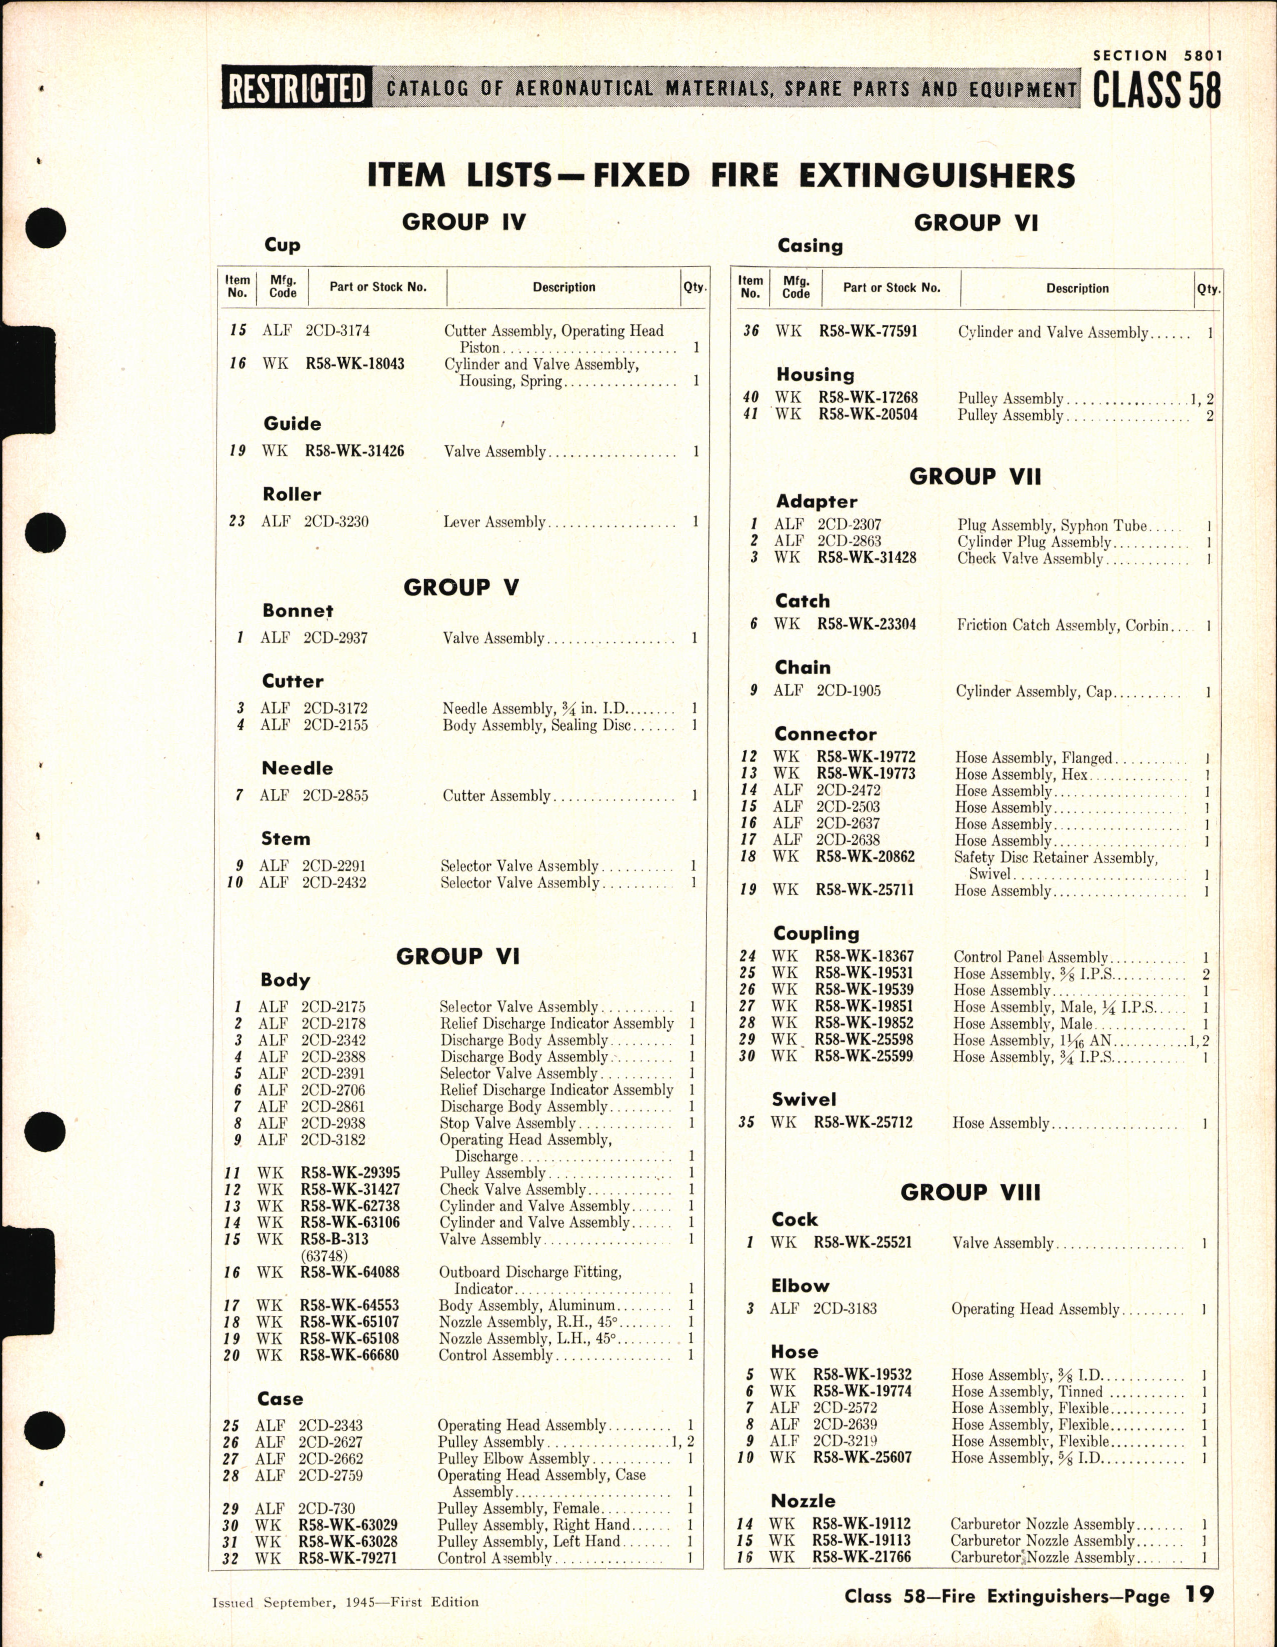 Sample page 19 from AirCorps Library document: Fire Extinguishers and Parts